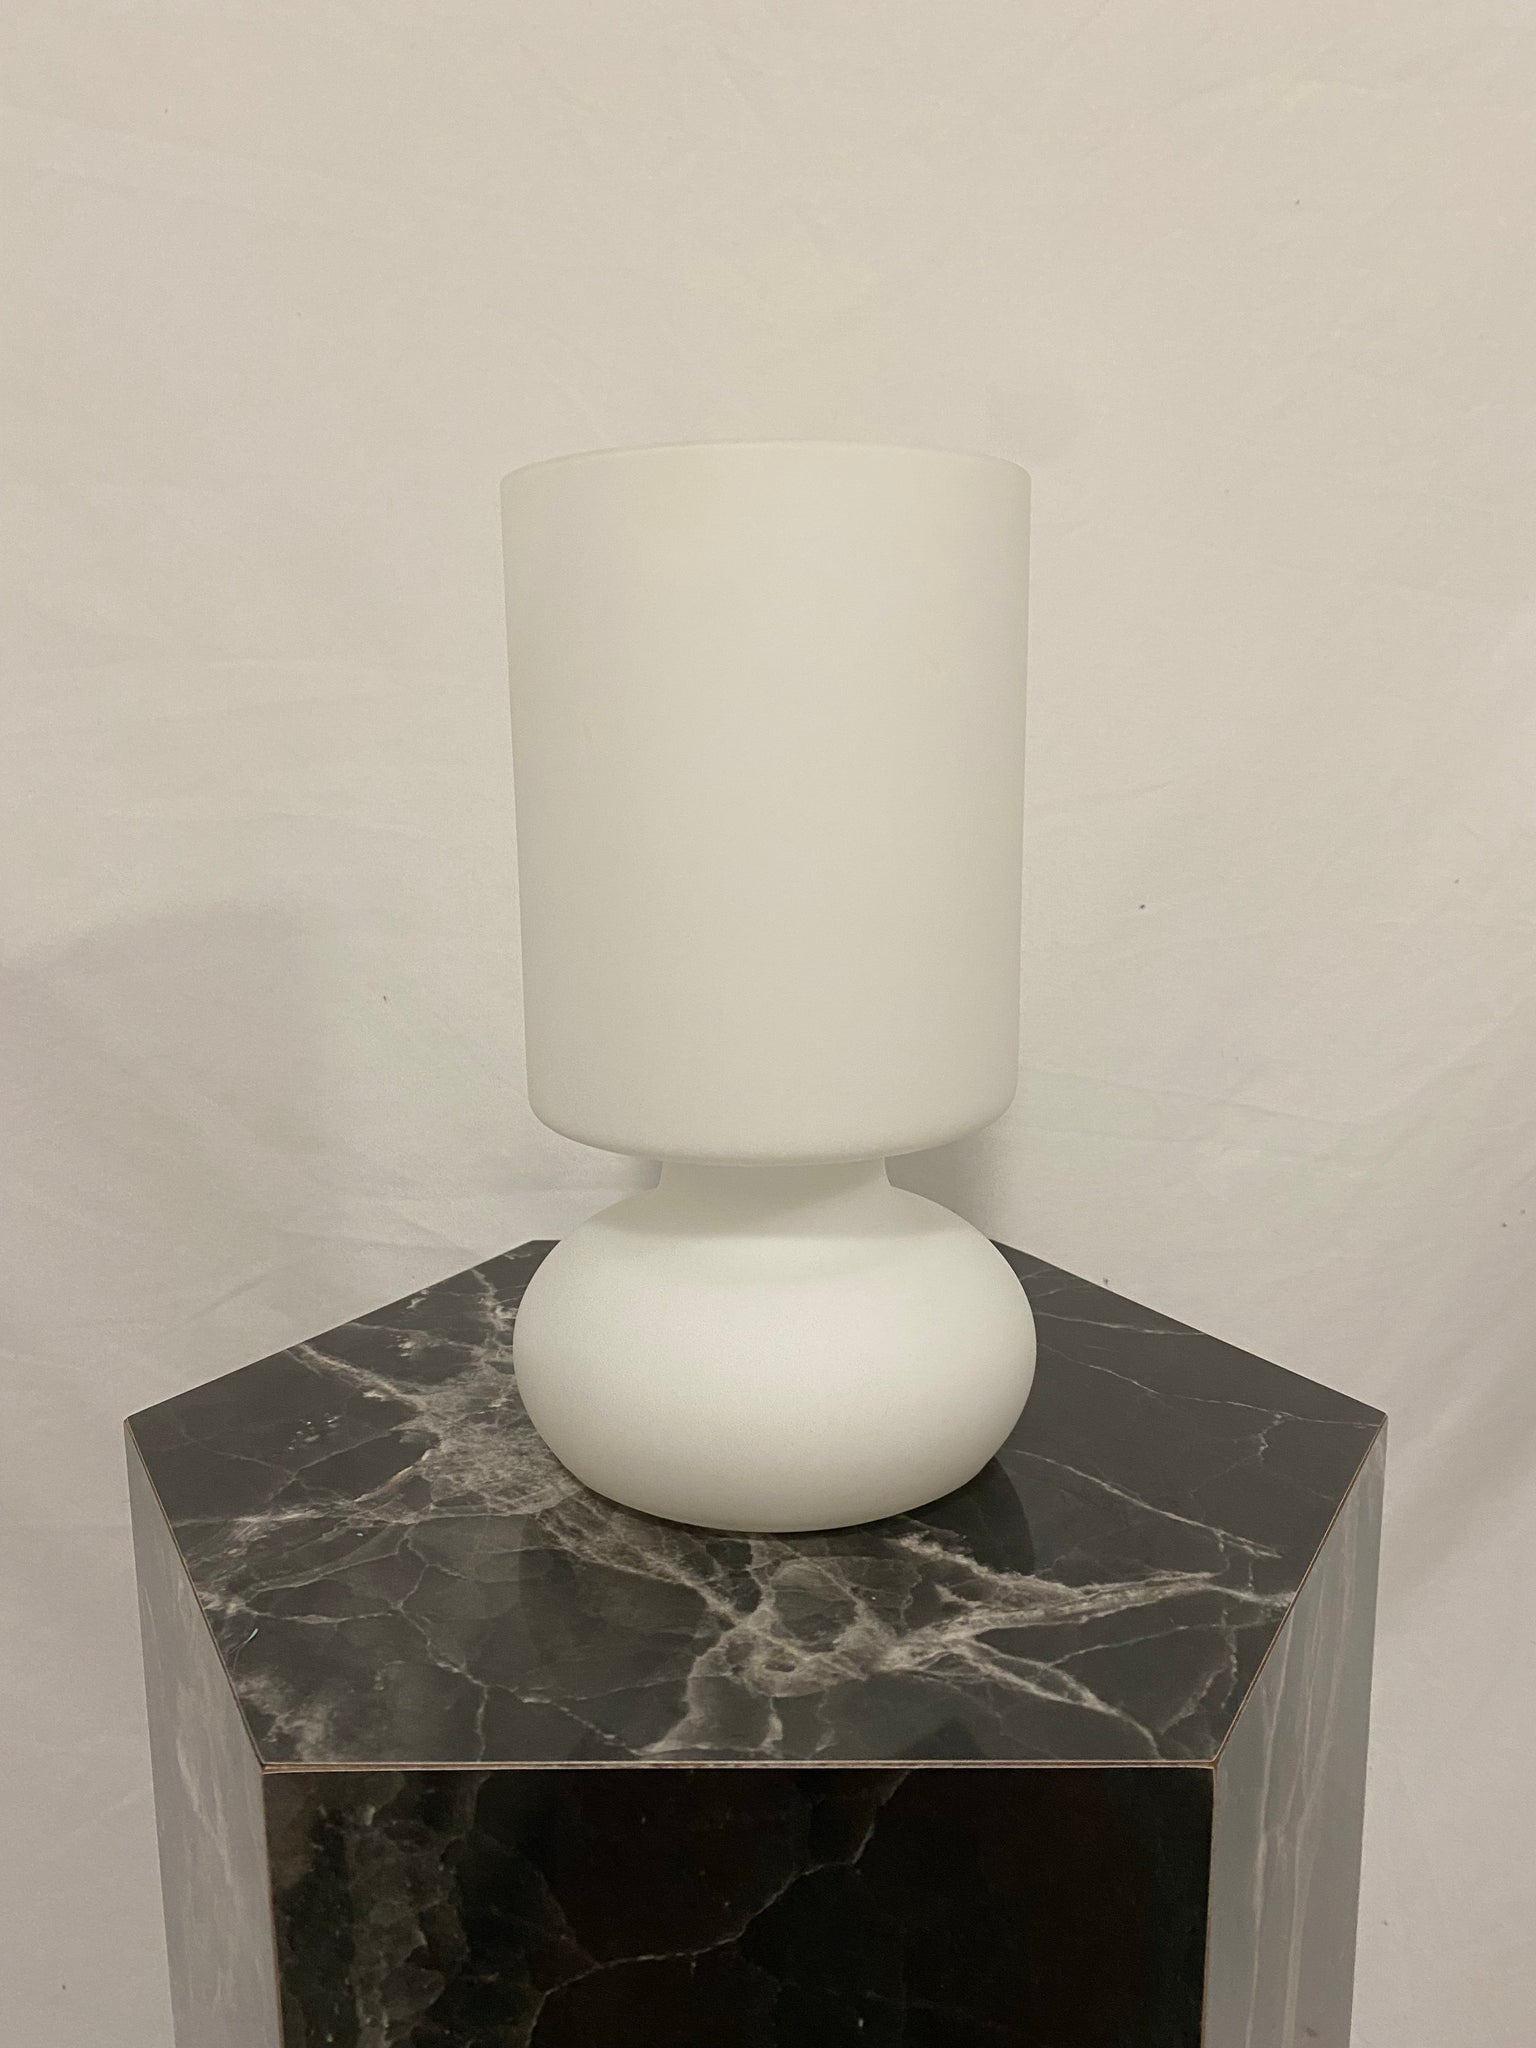 Frosted white IKEA Lykta lamp